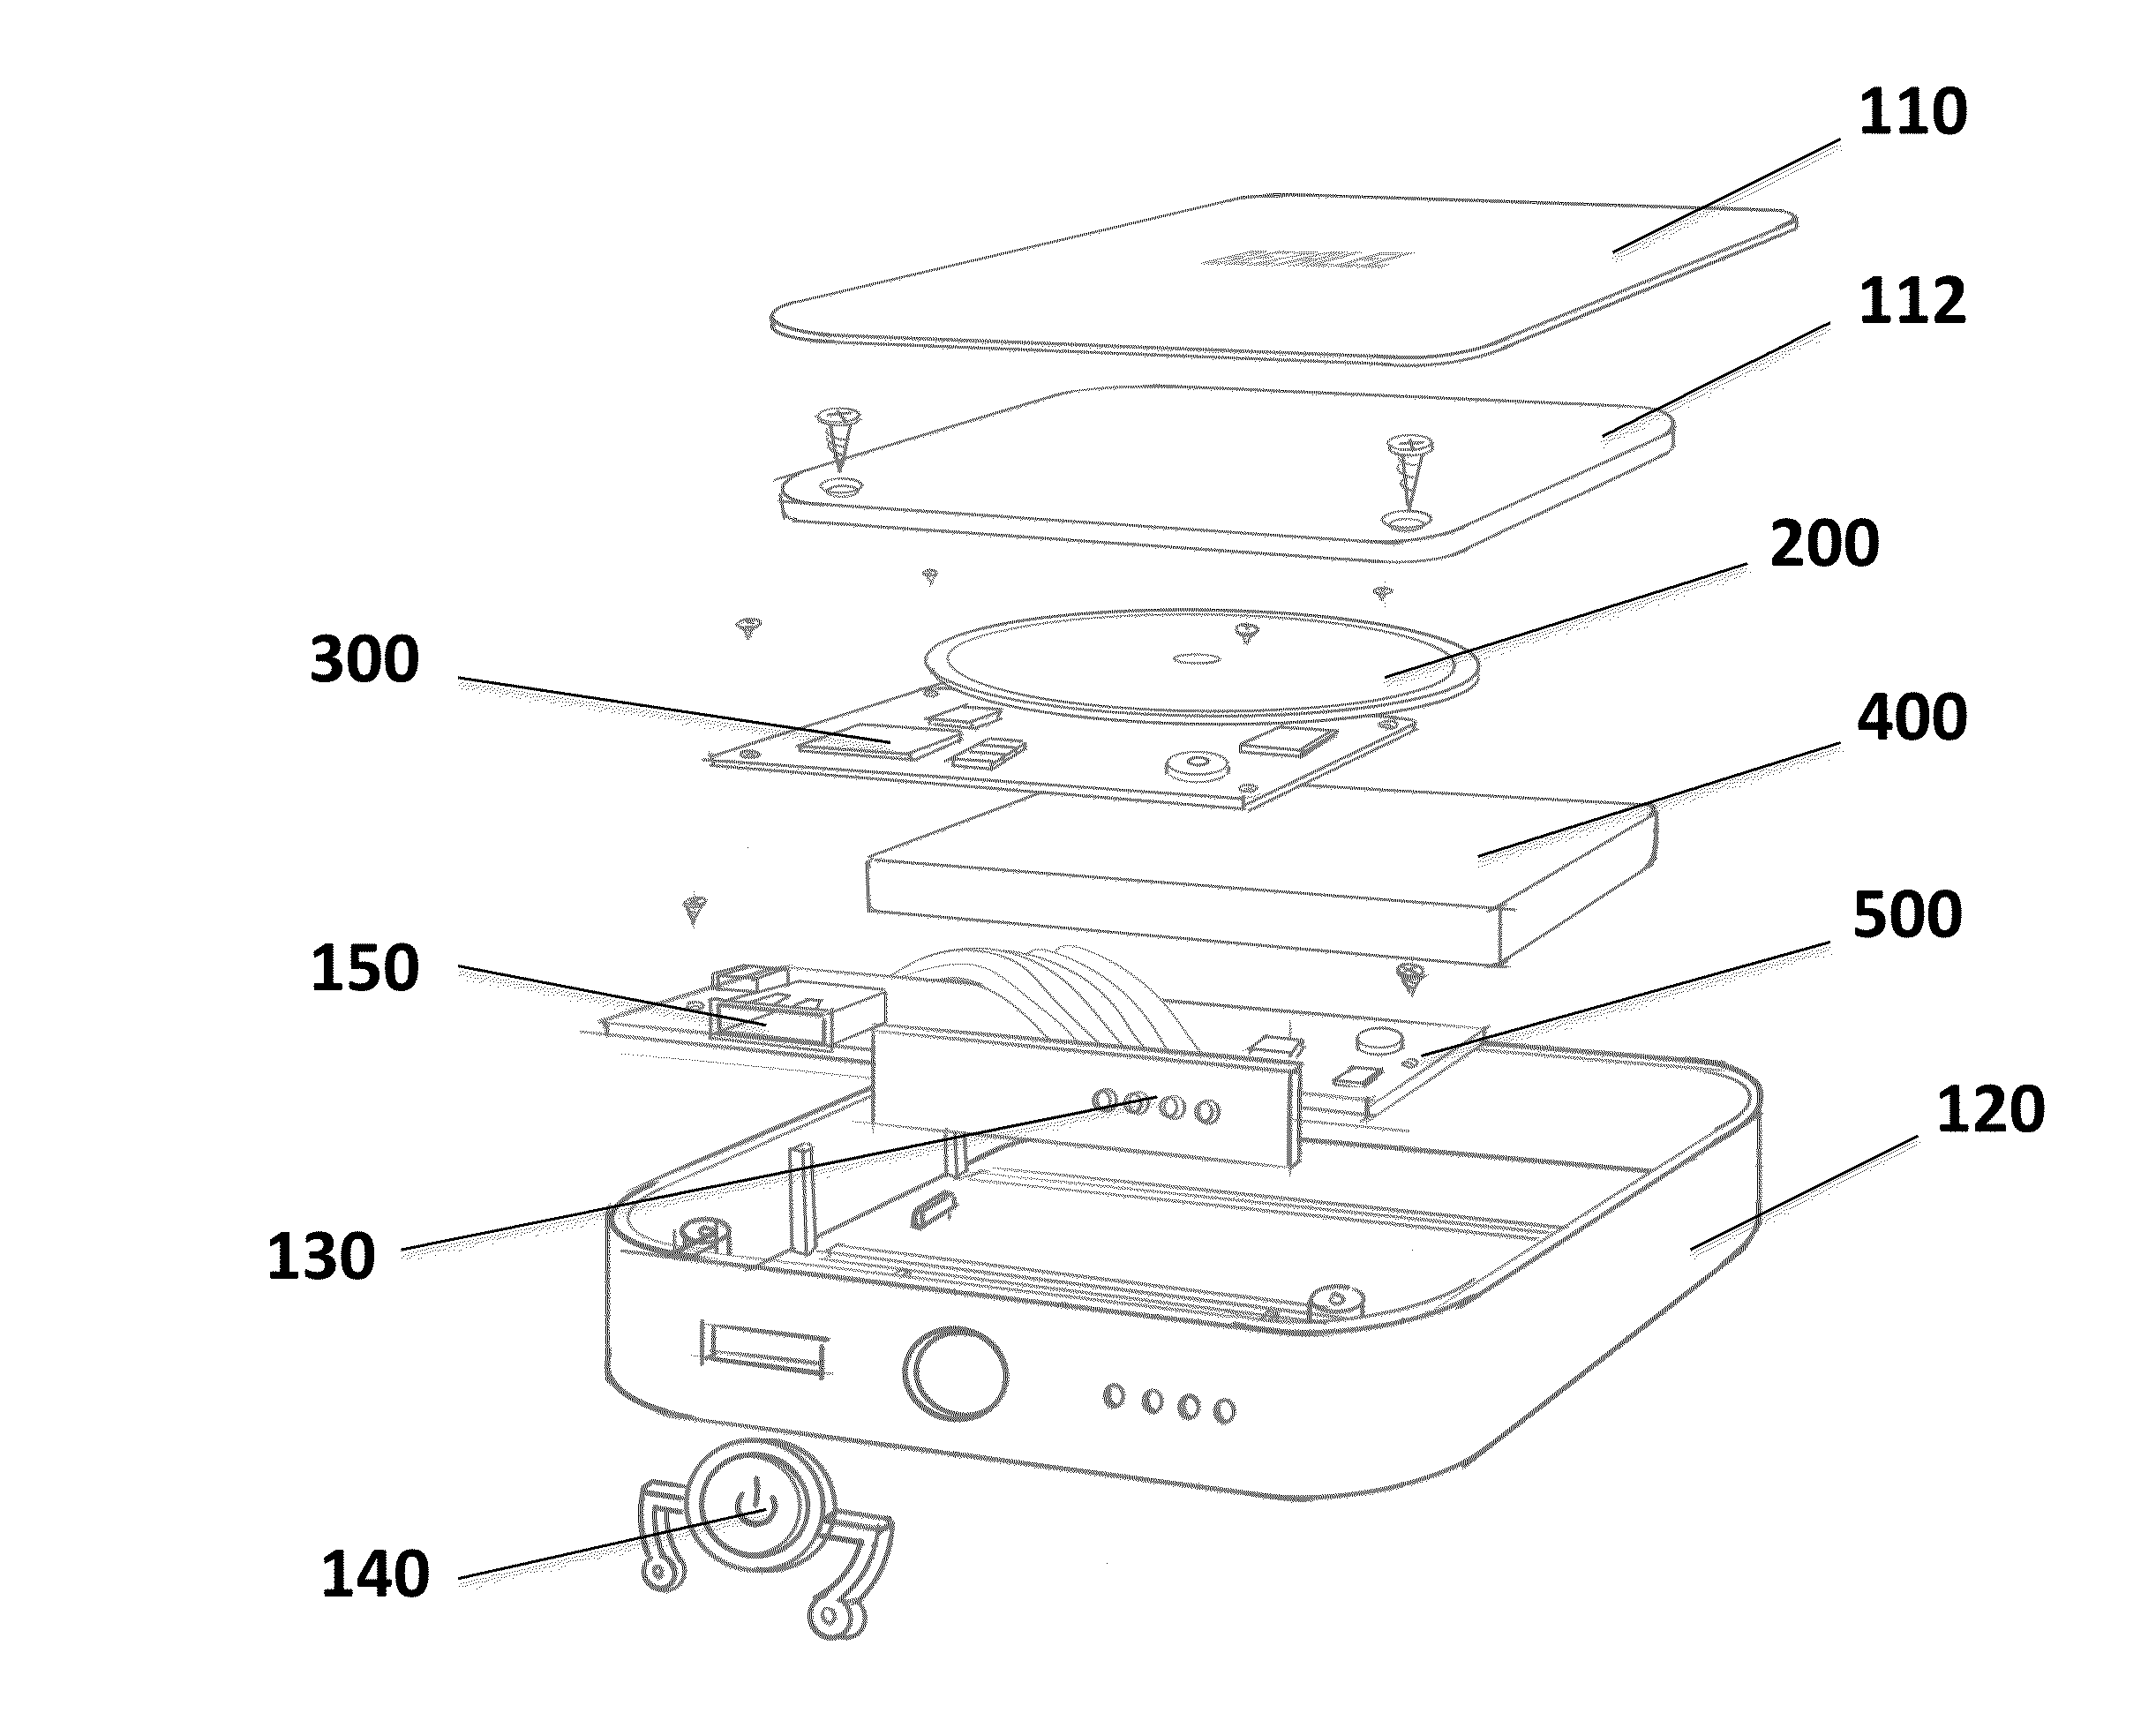 Portable wireless charging apparatus and system